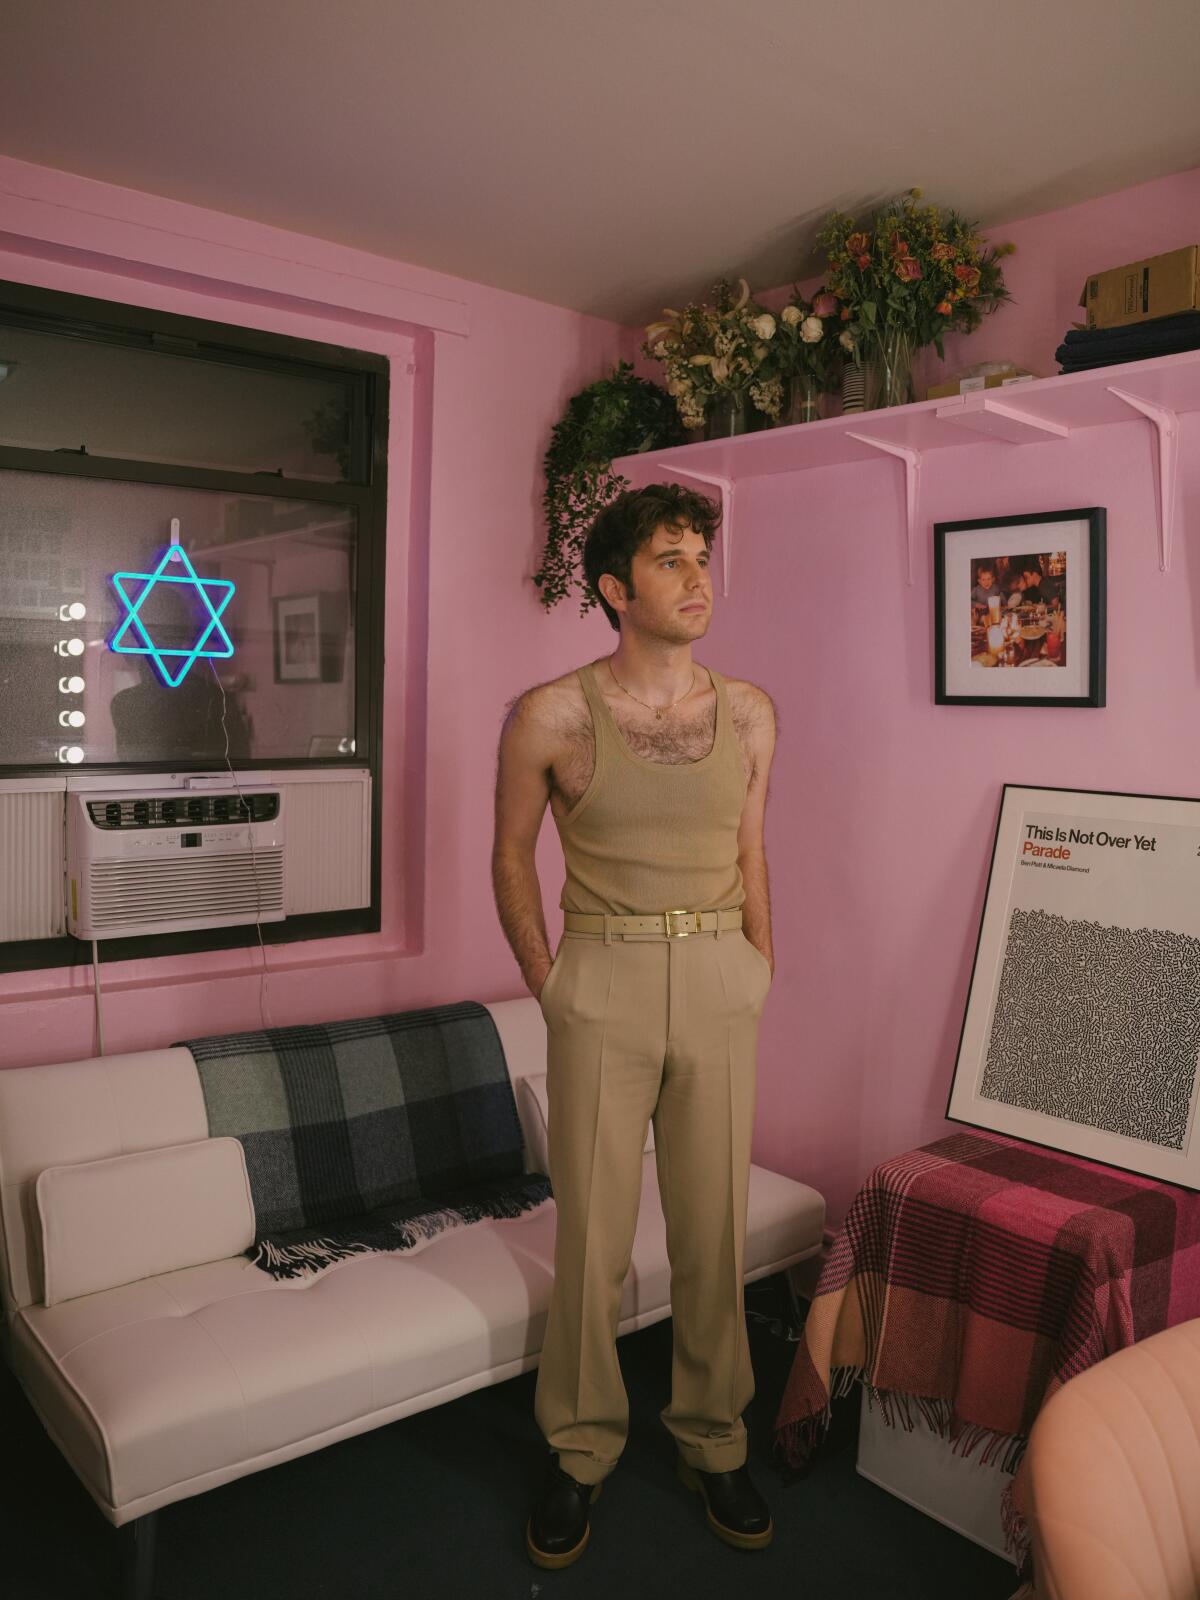 A man stands in a pink room, with a blue neon Star of David in the window.